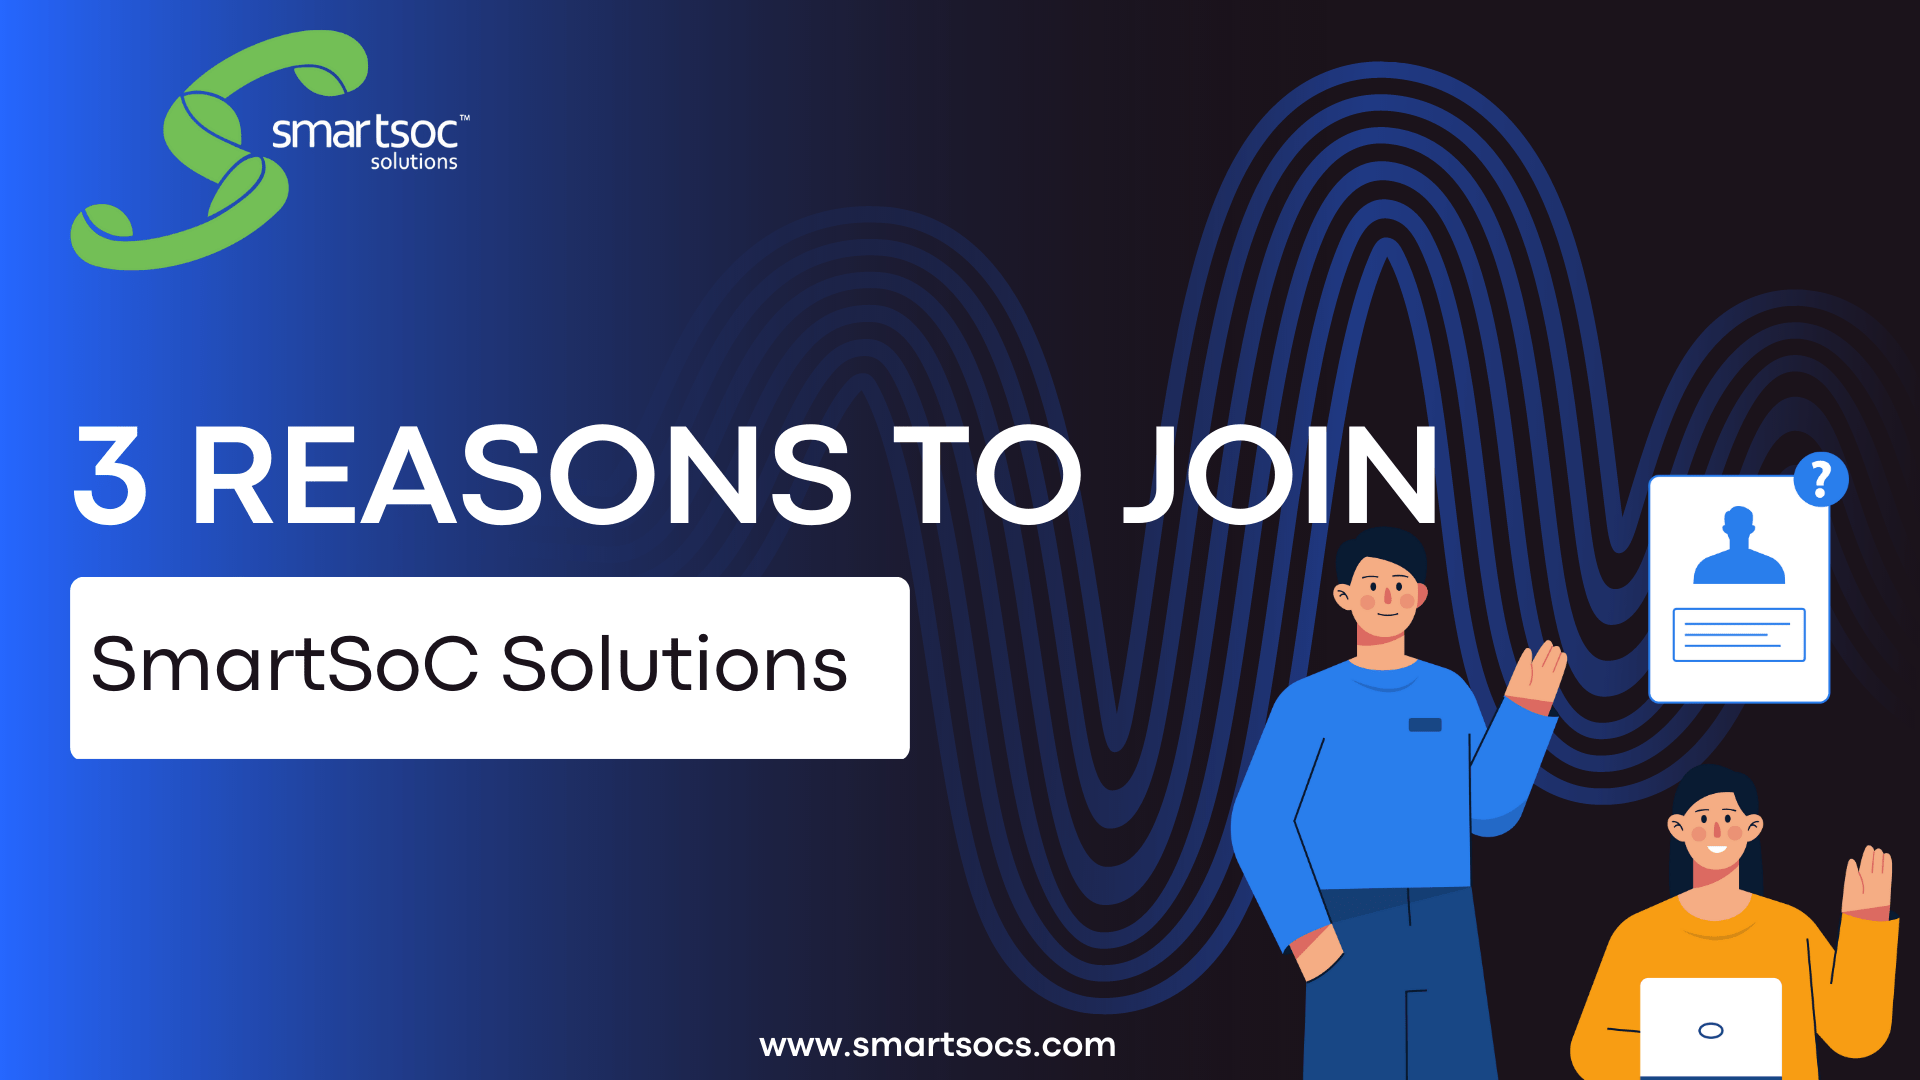 3 Reasons to Join SmartSoC Solutions